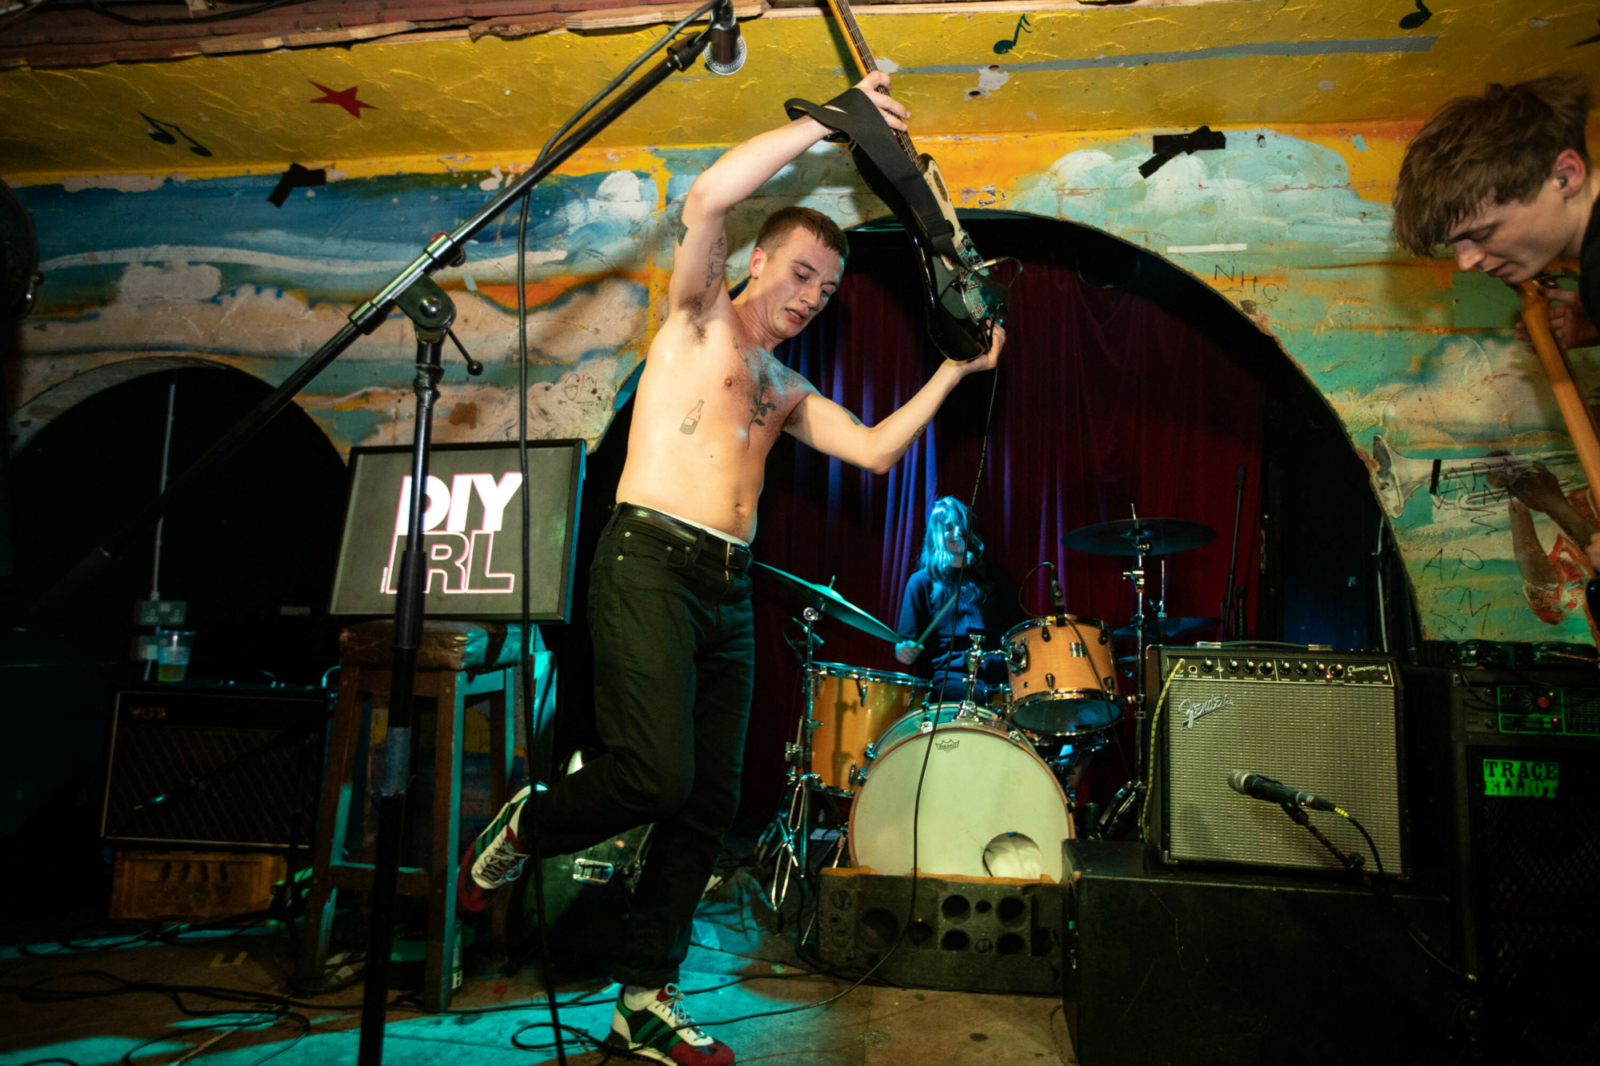 Talk Show bring topless anarchic energy to December’s DIY IRL